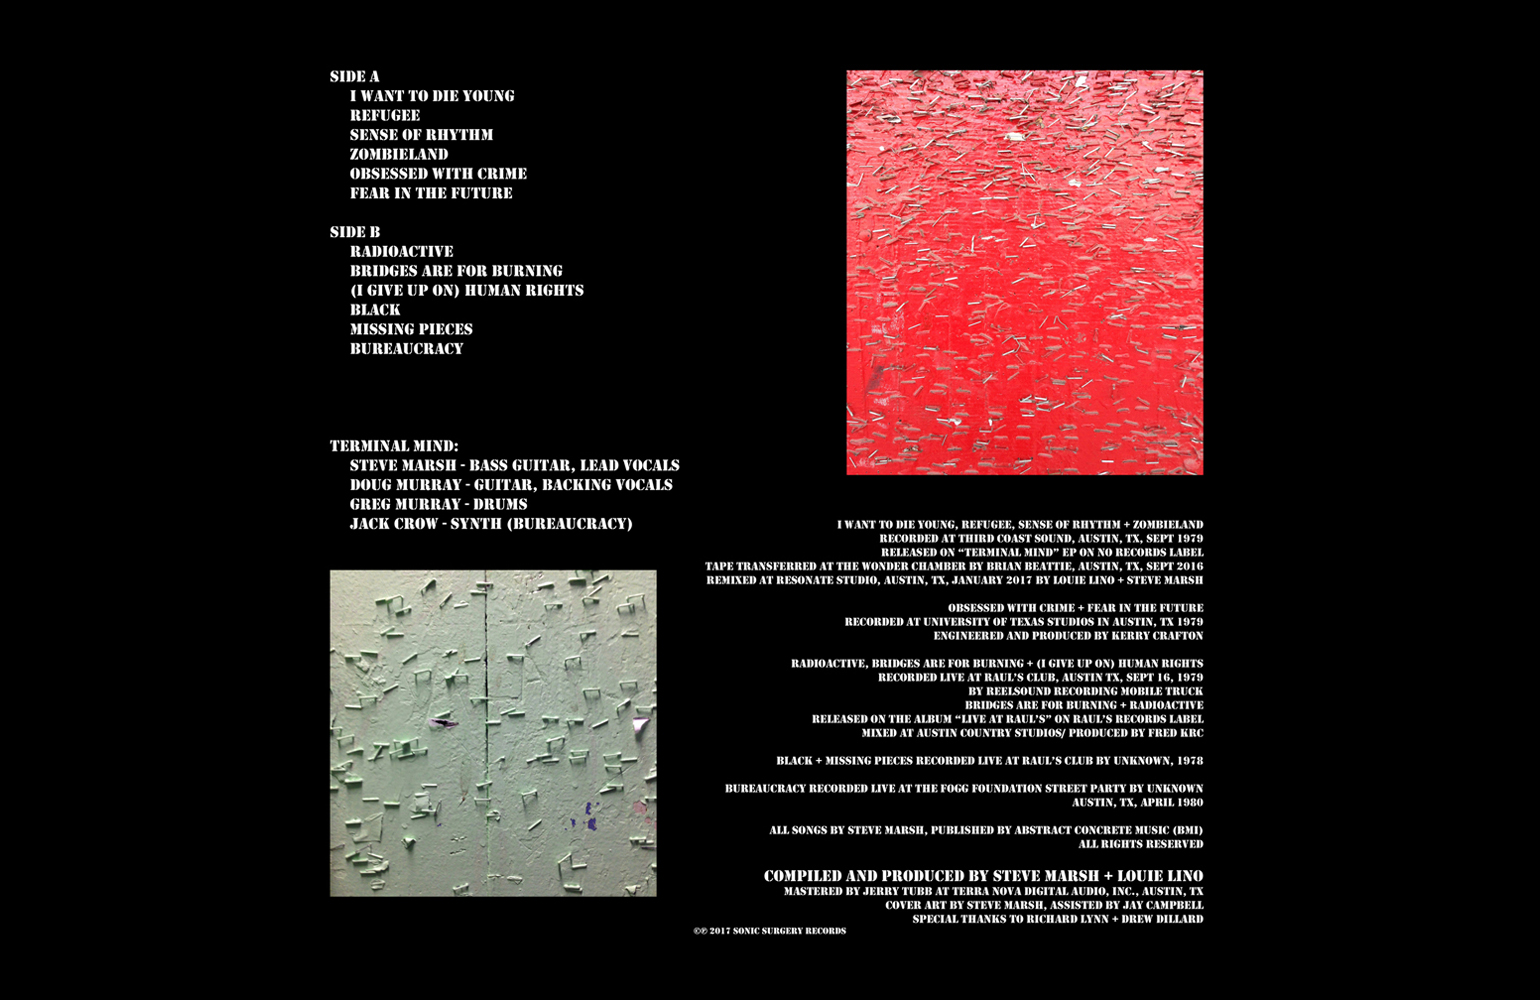 Back cover of LP